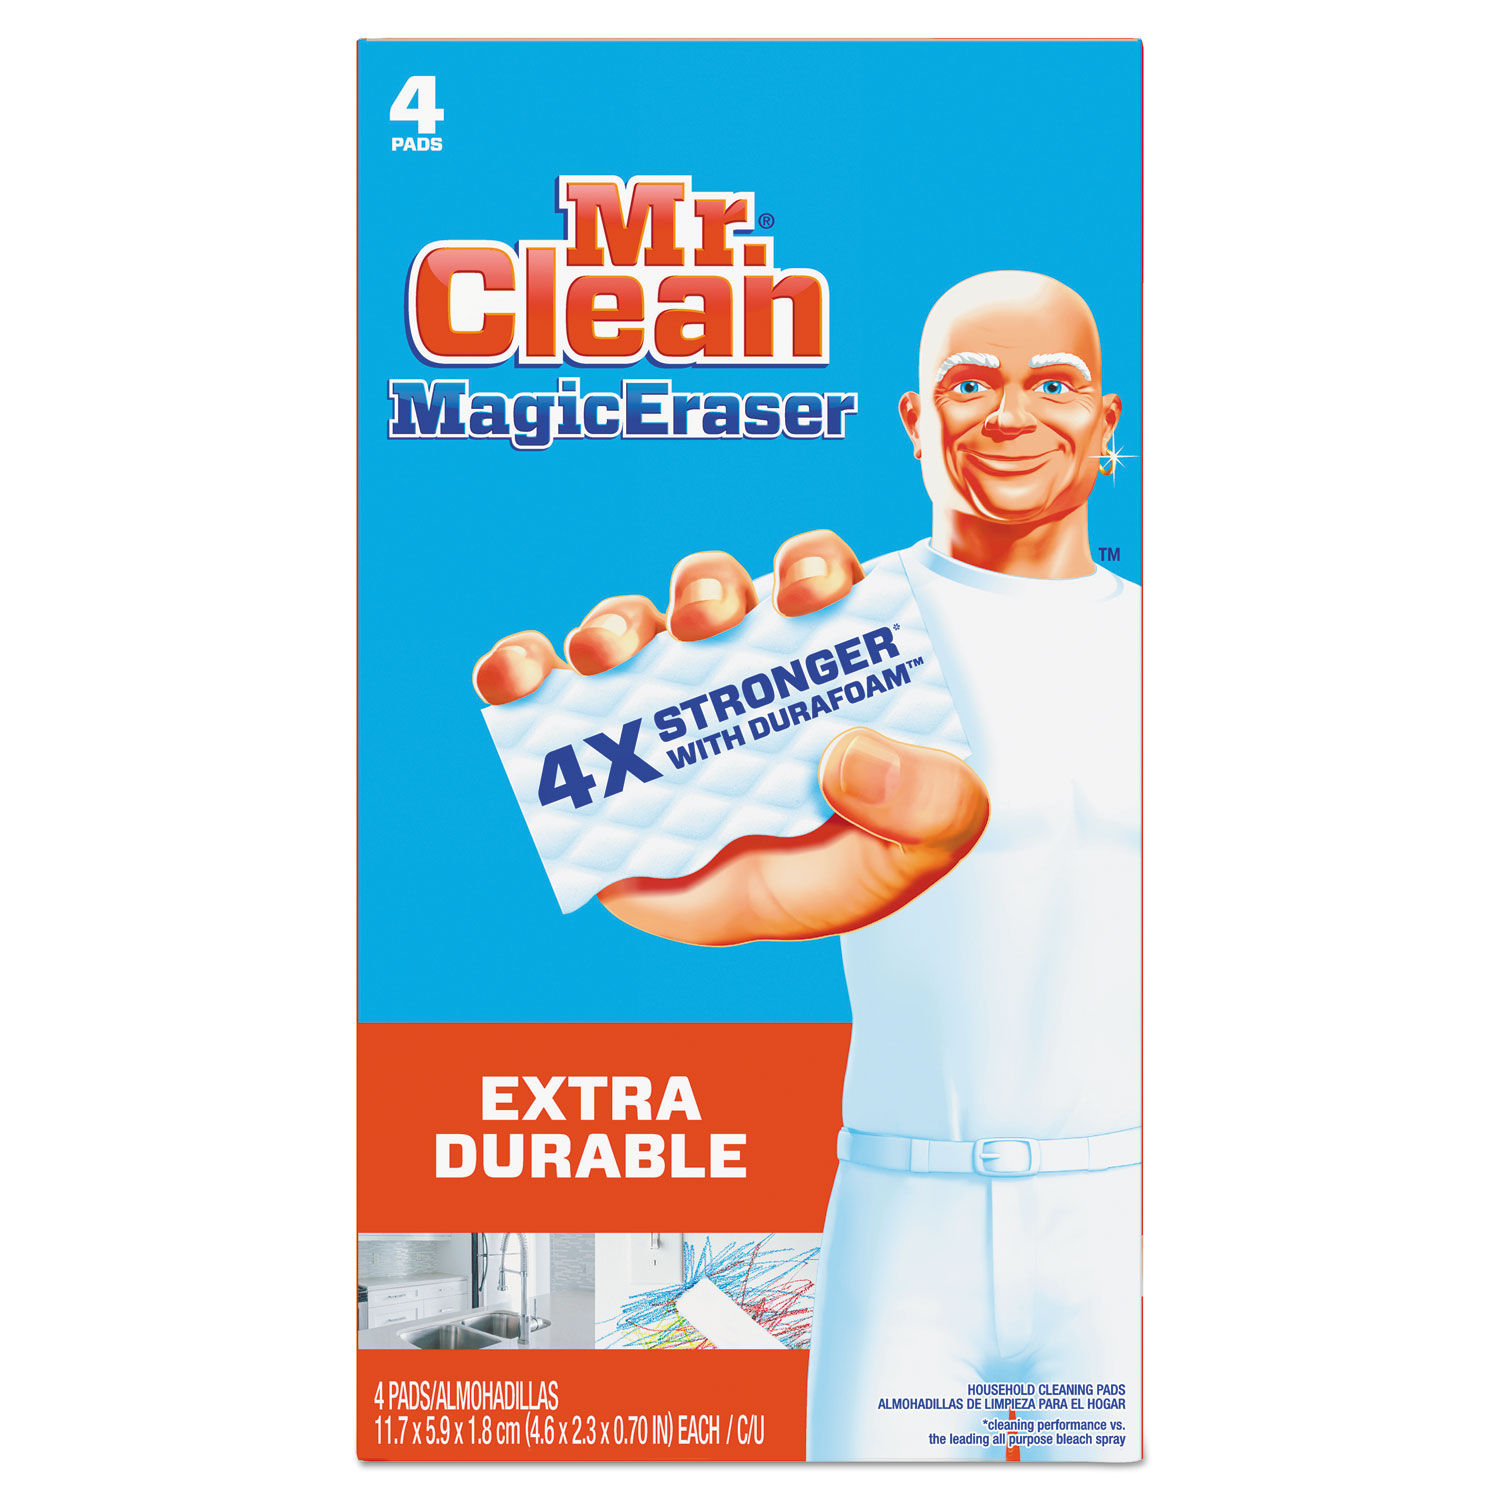 Mr Clean Household Cleaning Pads, Original, Magic Eraser - 9 pads